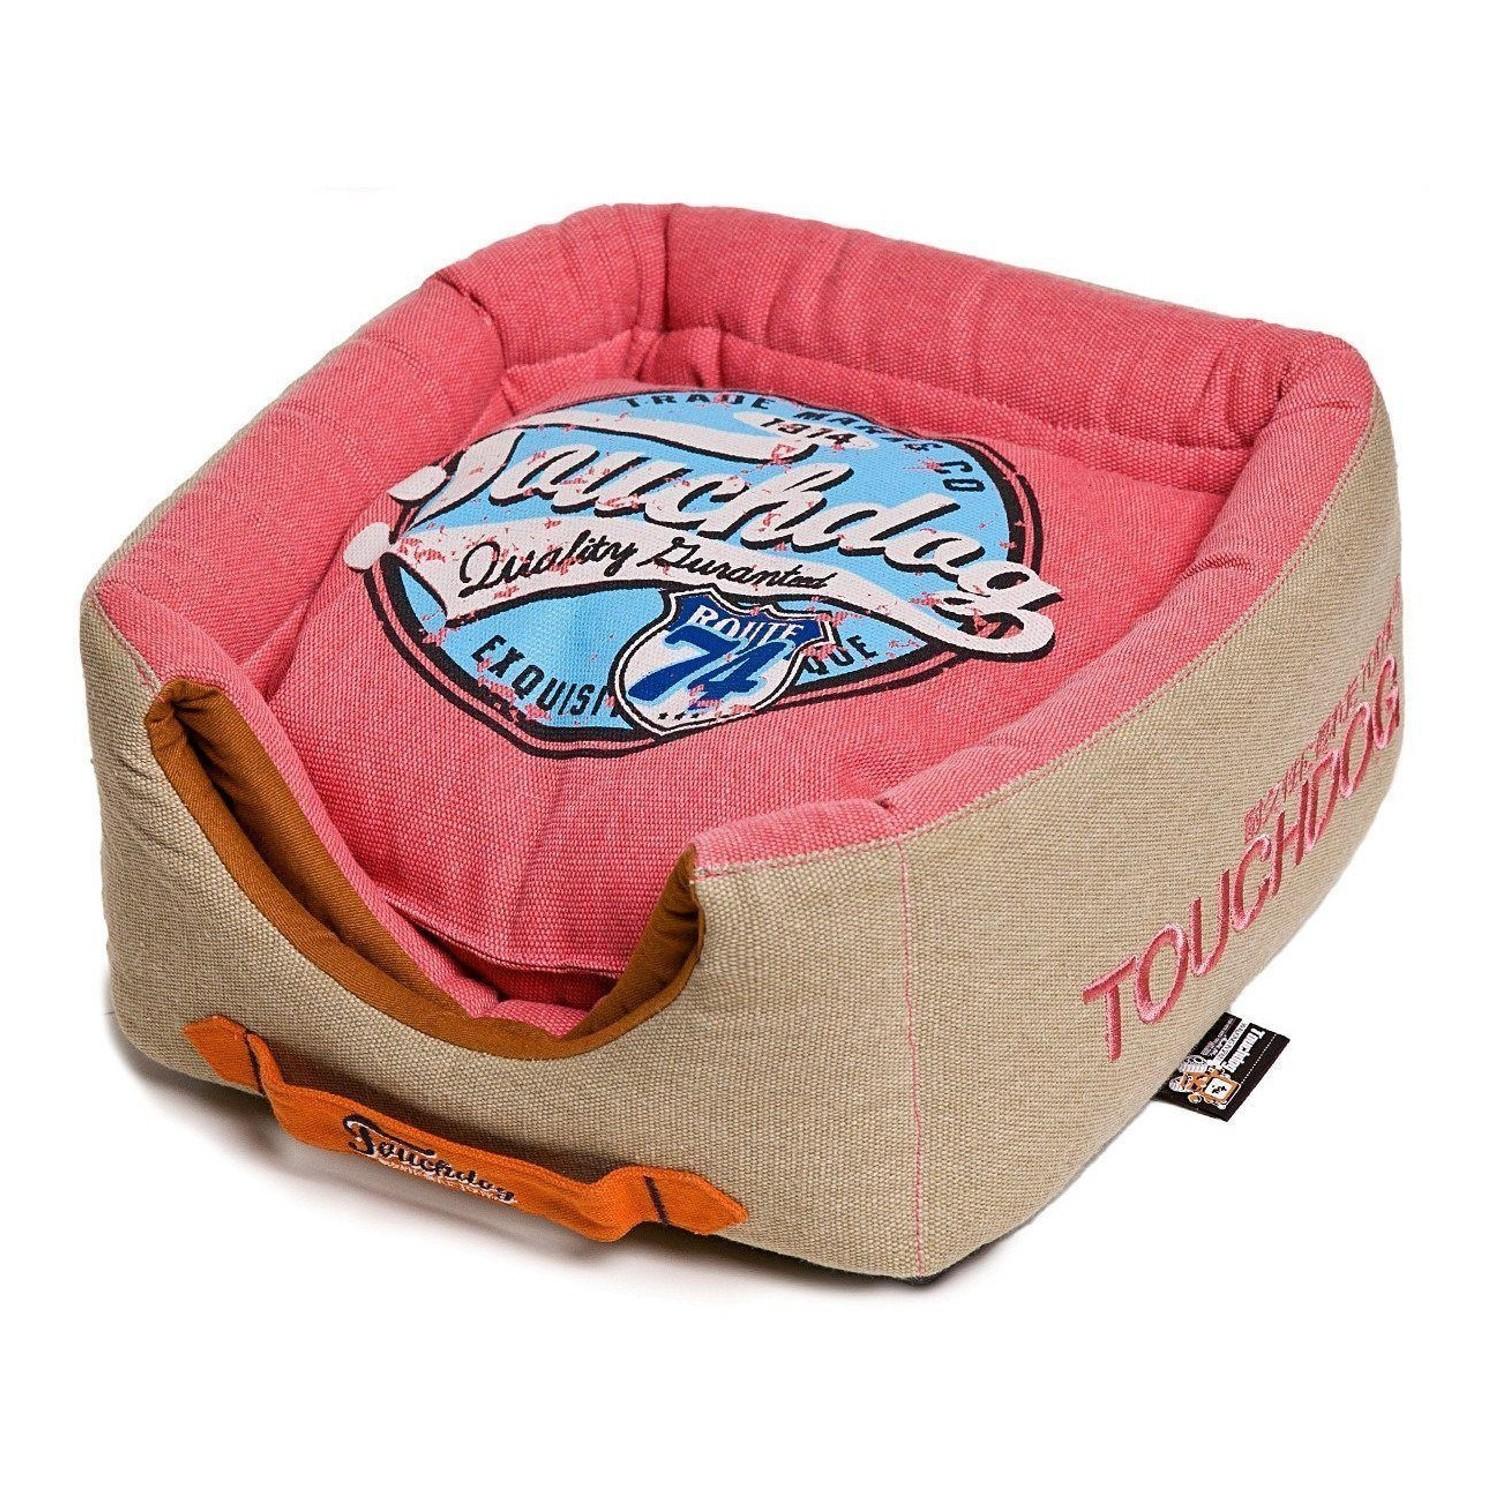 Pet Life Touchdog Vintage Squared 2-in-1 Collapsible Dog and Cat Bed - Bubblegum Pink, Beige